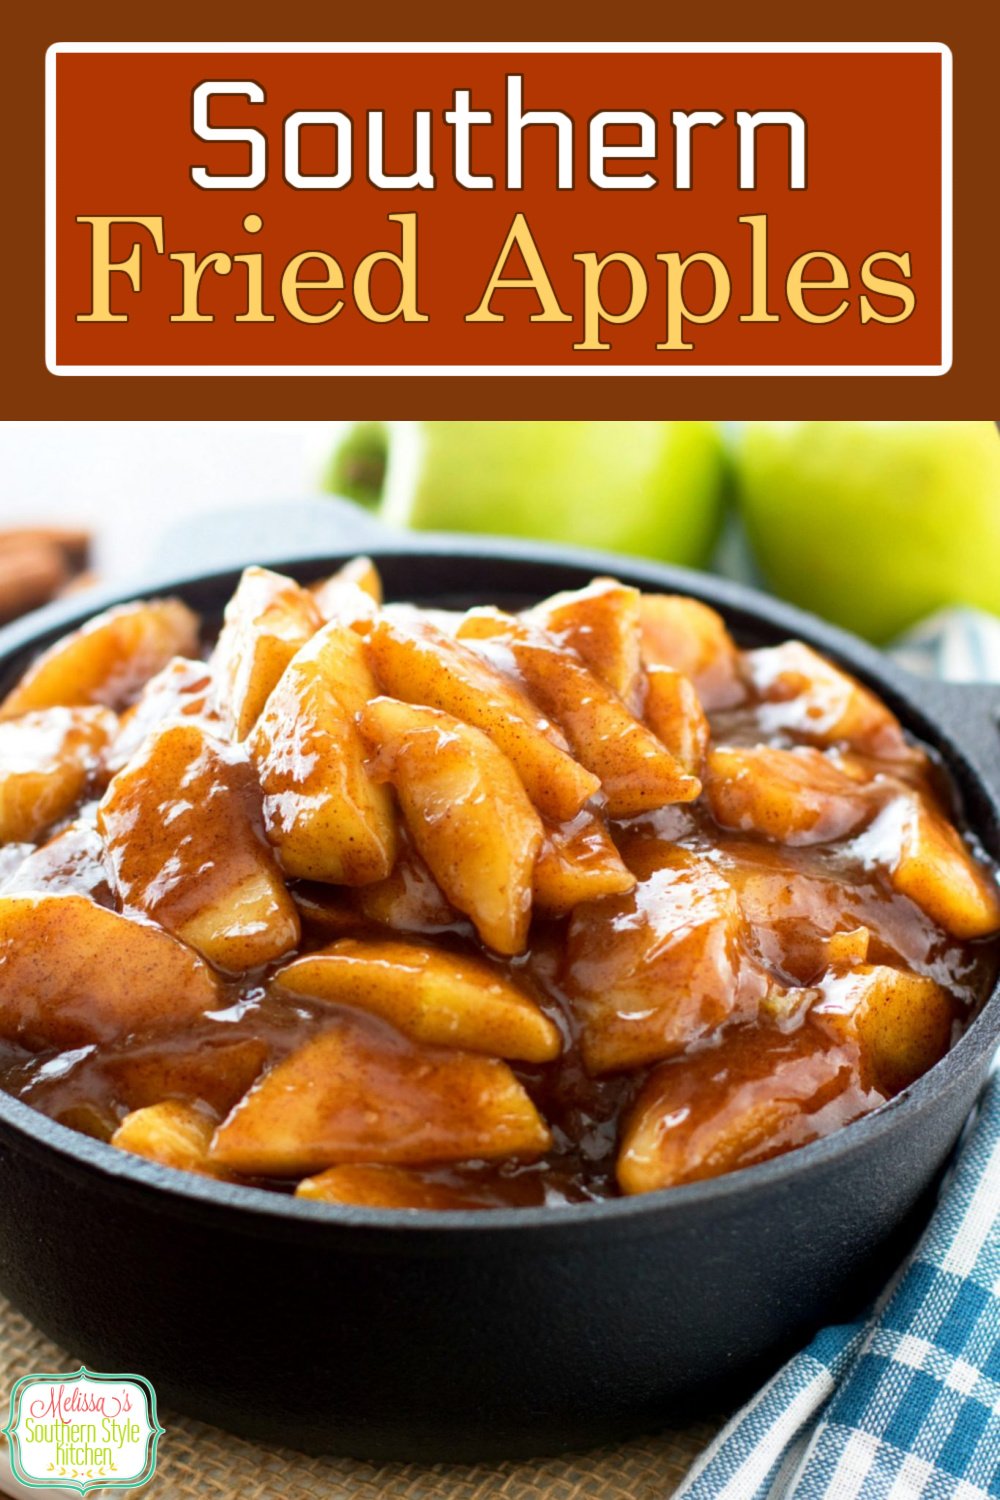 Serve these fried apples as a side dish with chicken, ham or pork, ladled over biscuits and pancakes or for dessert with vanilla ice cream #southernfriedapples #friedapples #applerecipes #sikdedishrecipes #fruit #appledesserts #dessertfoodrecipes #desserts #fallbaking #thanksgiving #southernfood #soujthernrecipes #brunch #breakfast #dinnerideas via @melissasssk